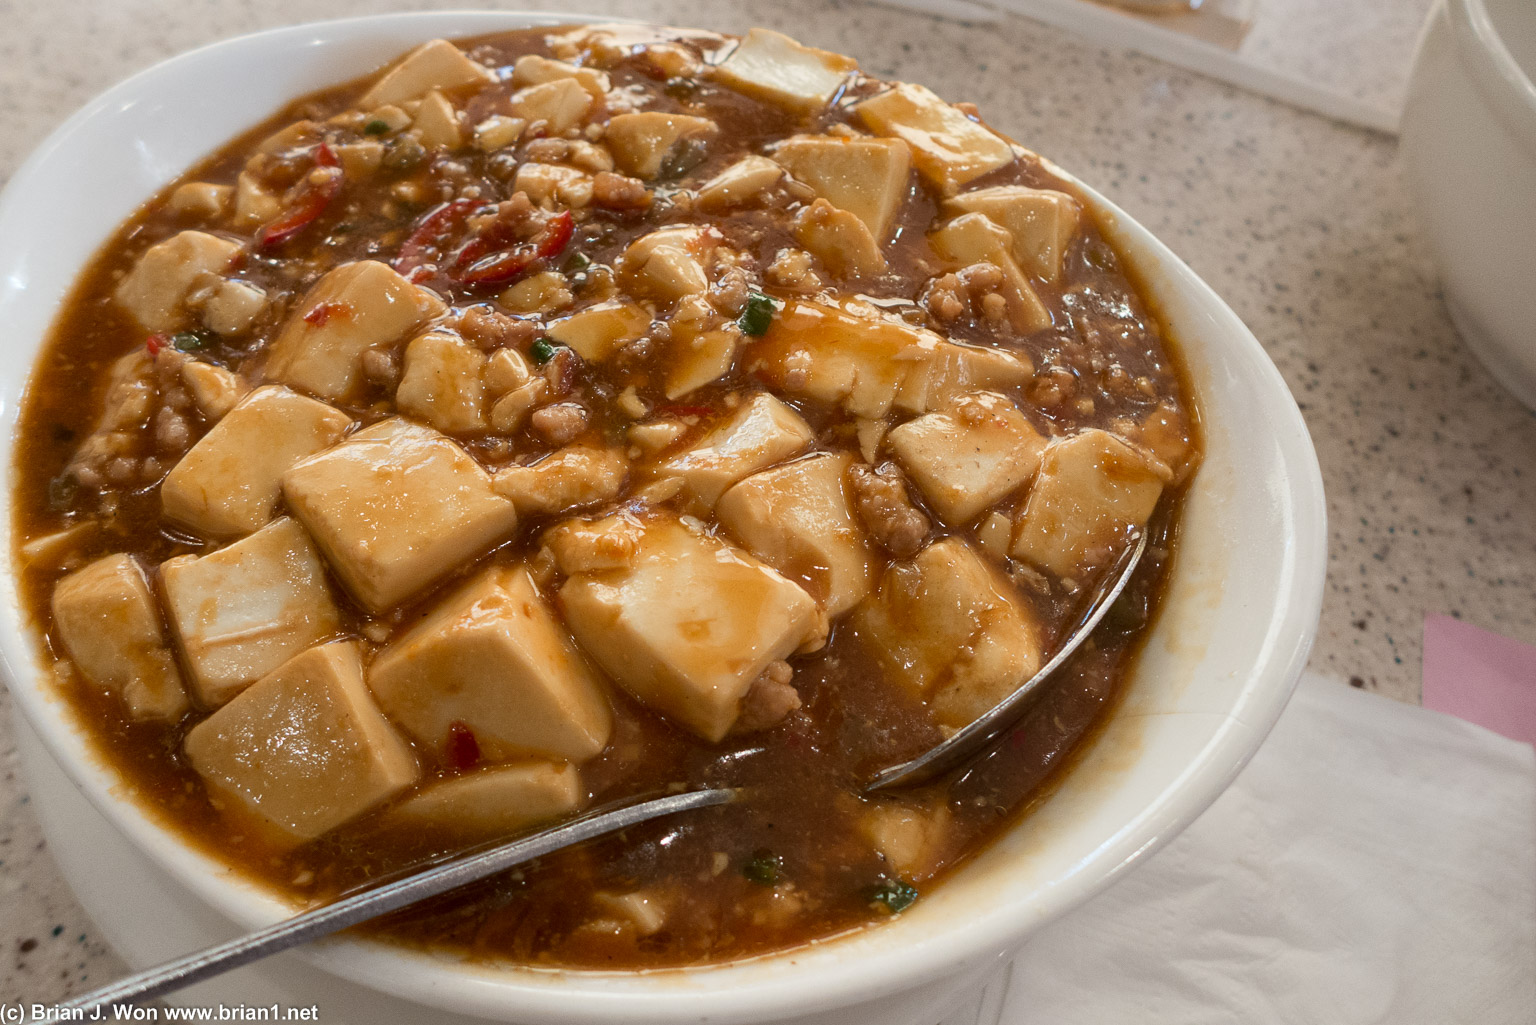 Mapo tofu. Just okay. Should've ordered it extra spicy.